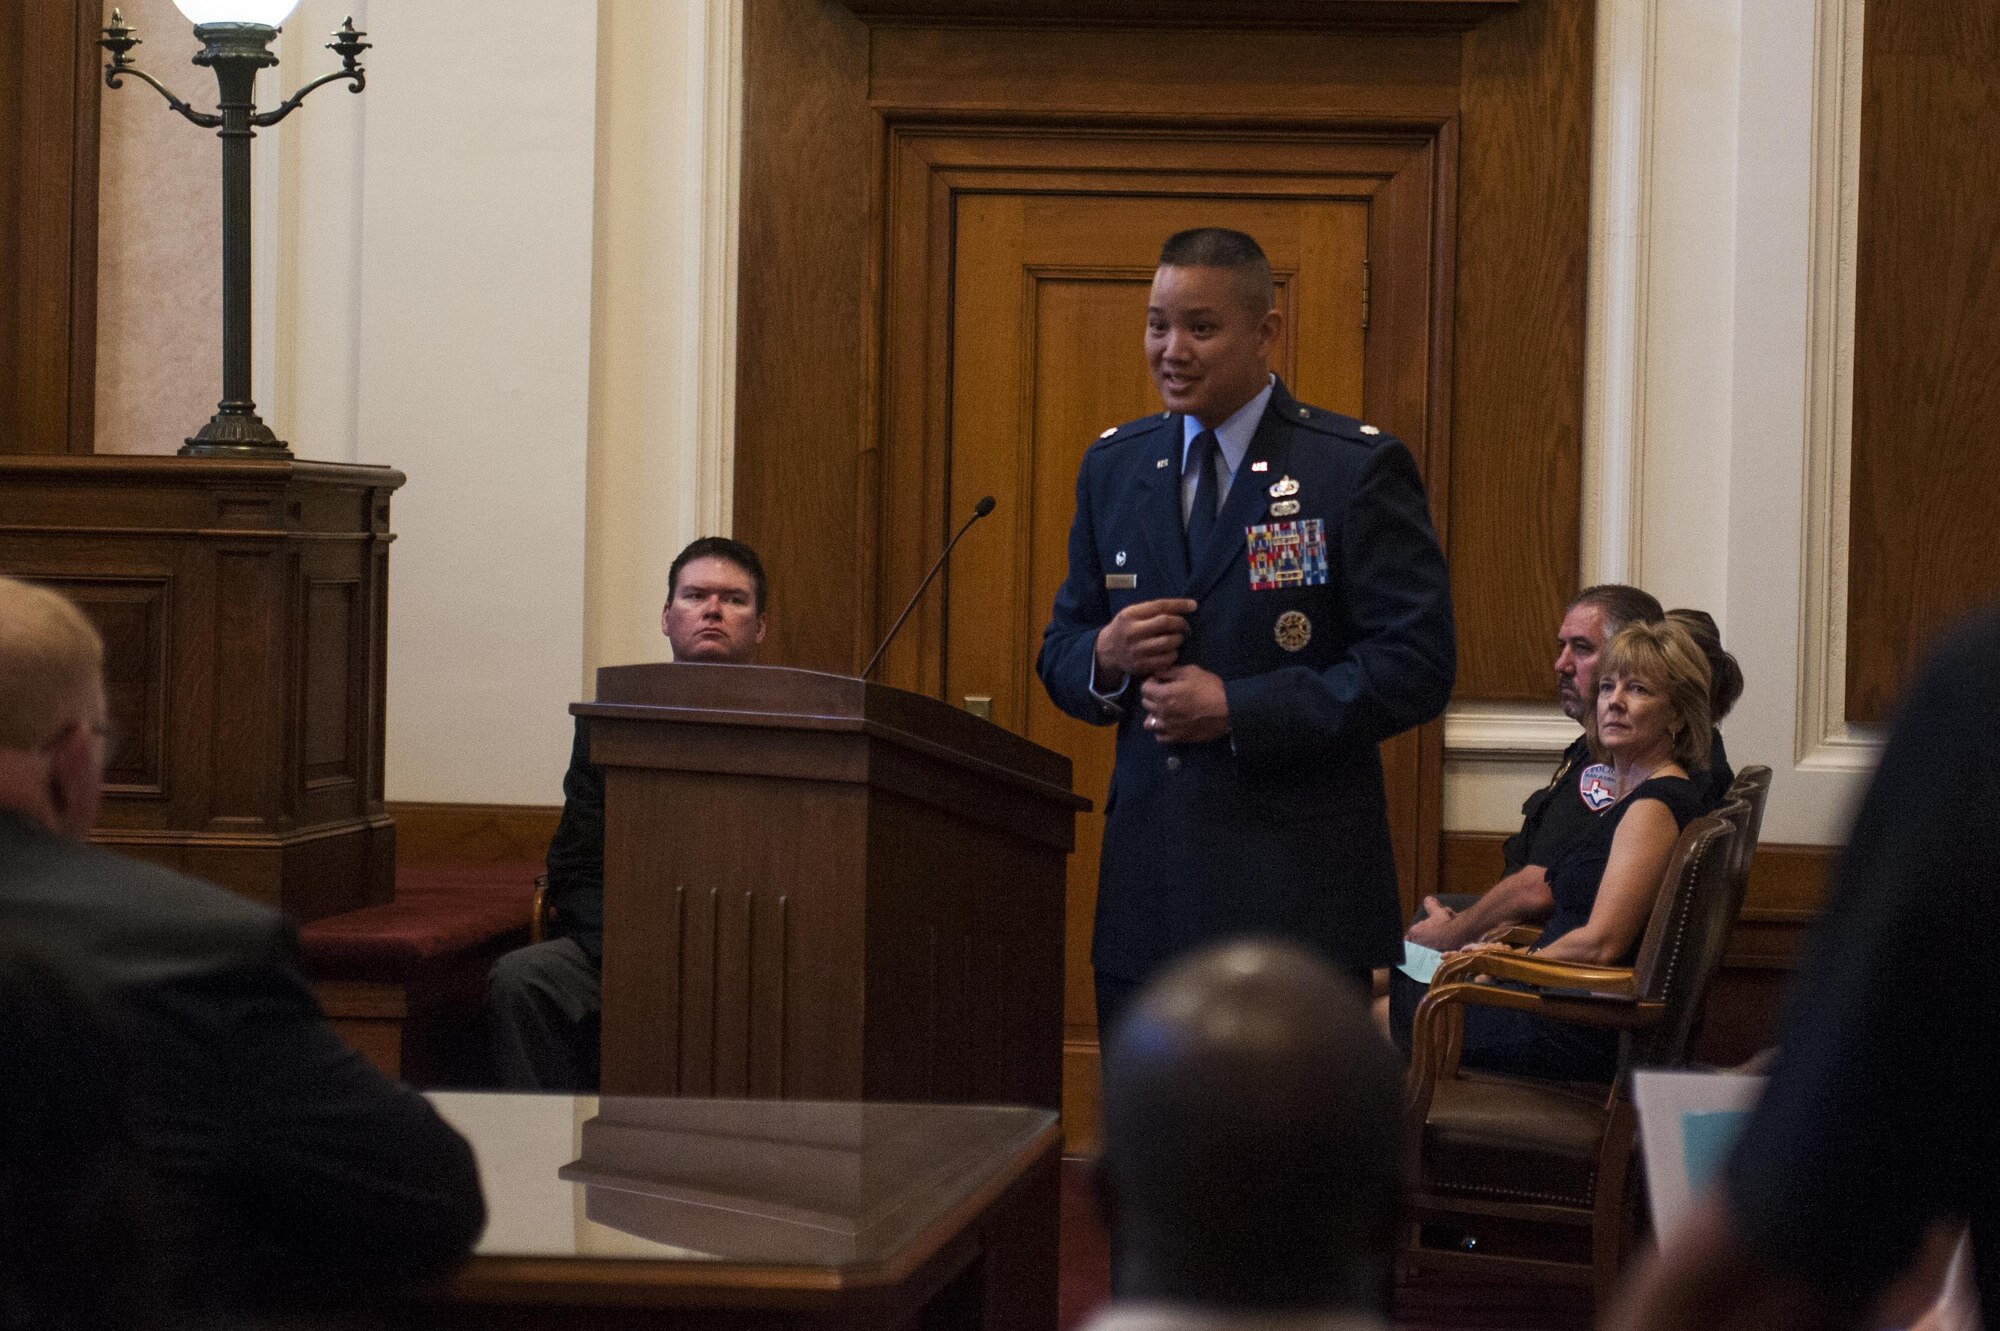 U.S. Air Force Lt. Col. Abraham Salomon, 17th Training Support Squadron commander, speaks to the new naturalized citizens of America in the O.C. Fisher Building, San Angelo, Texas, June 7, 2017. Salomon talked about how honored he was to give the speech and how important this day in their lives is. (U.S. Air Force photo by Senior Airman Scott Jackson/Released)